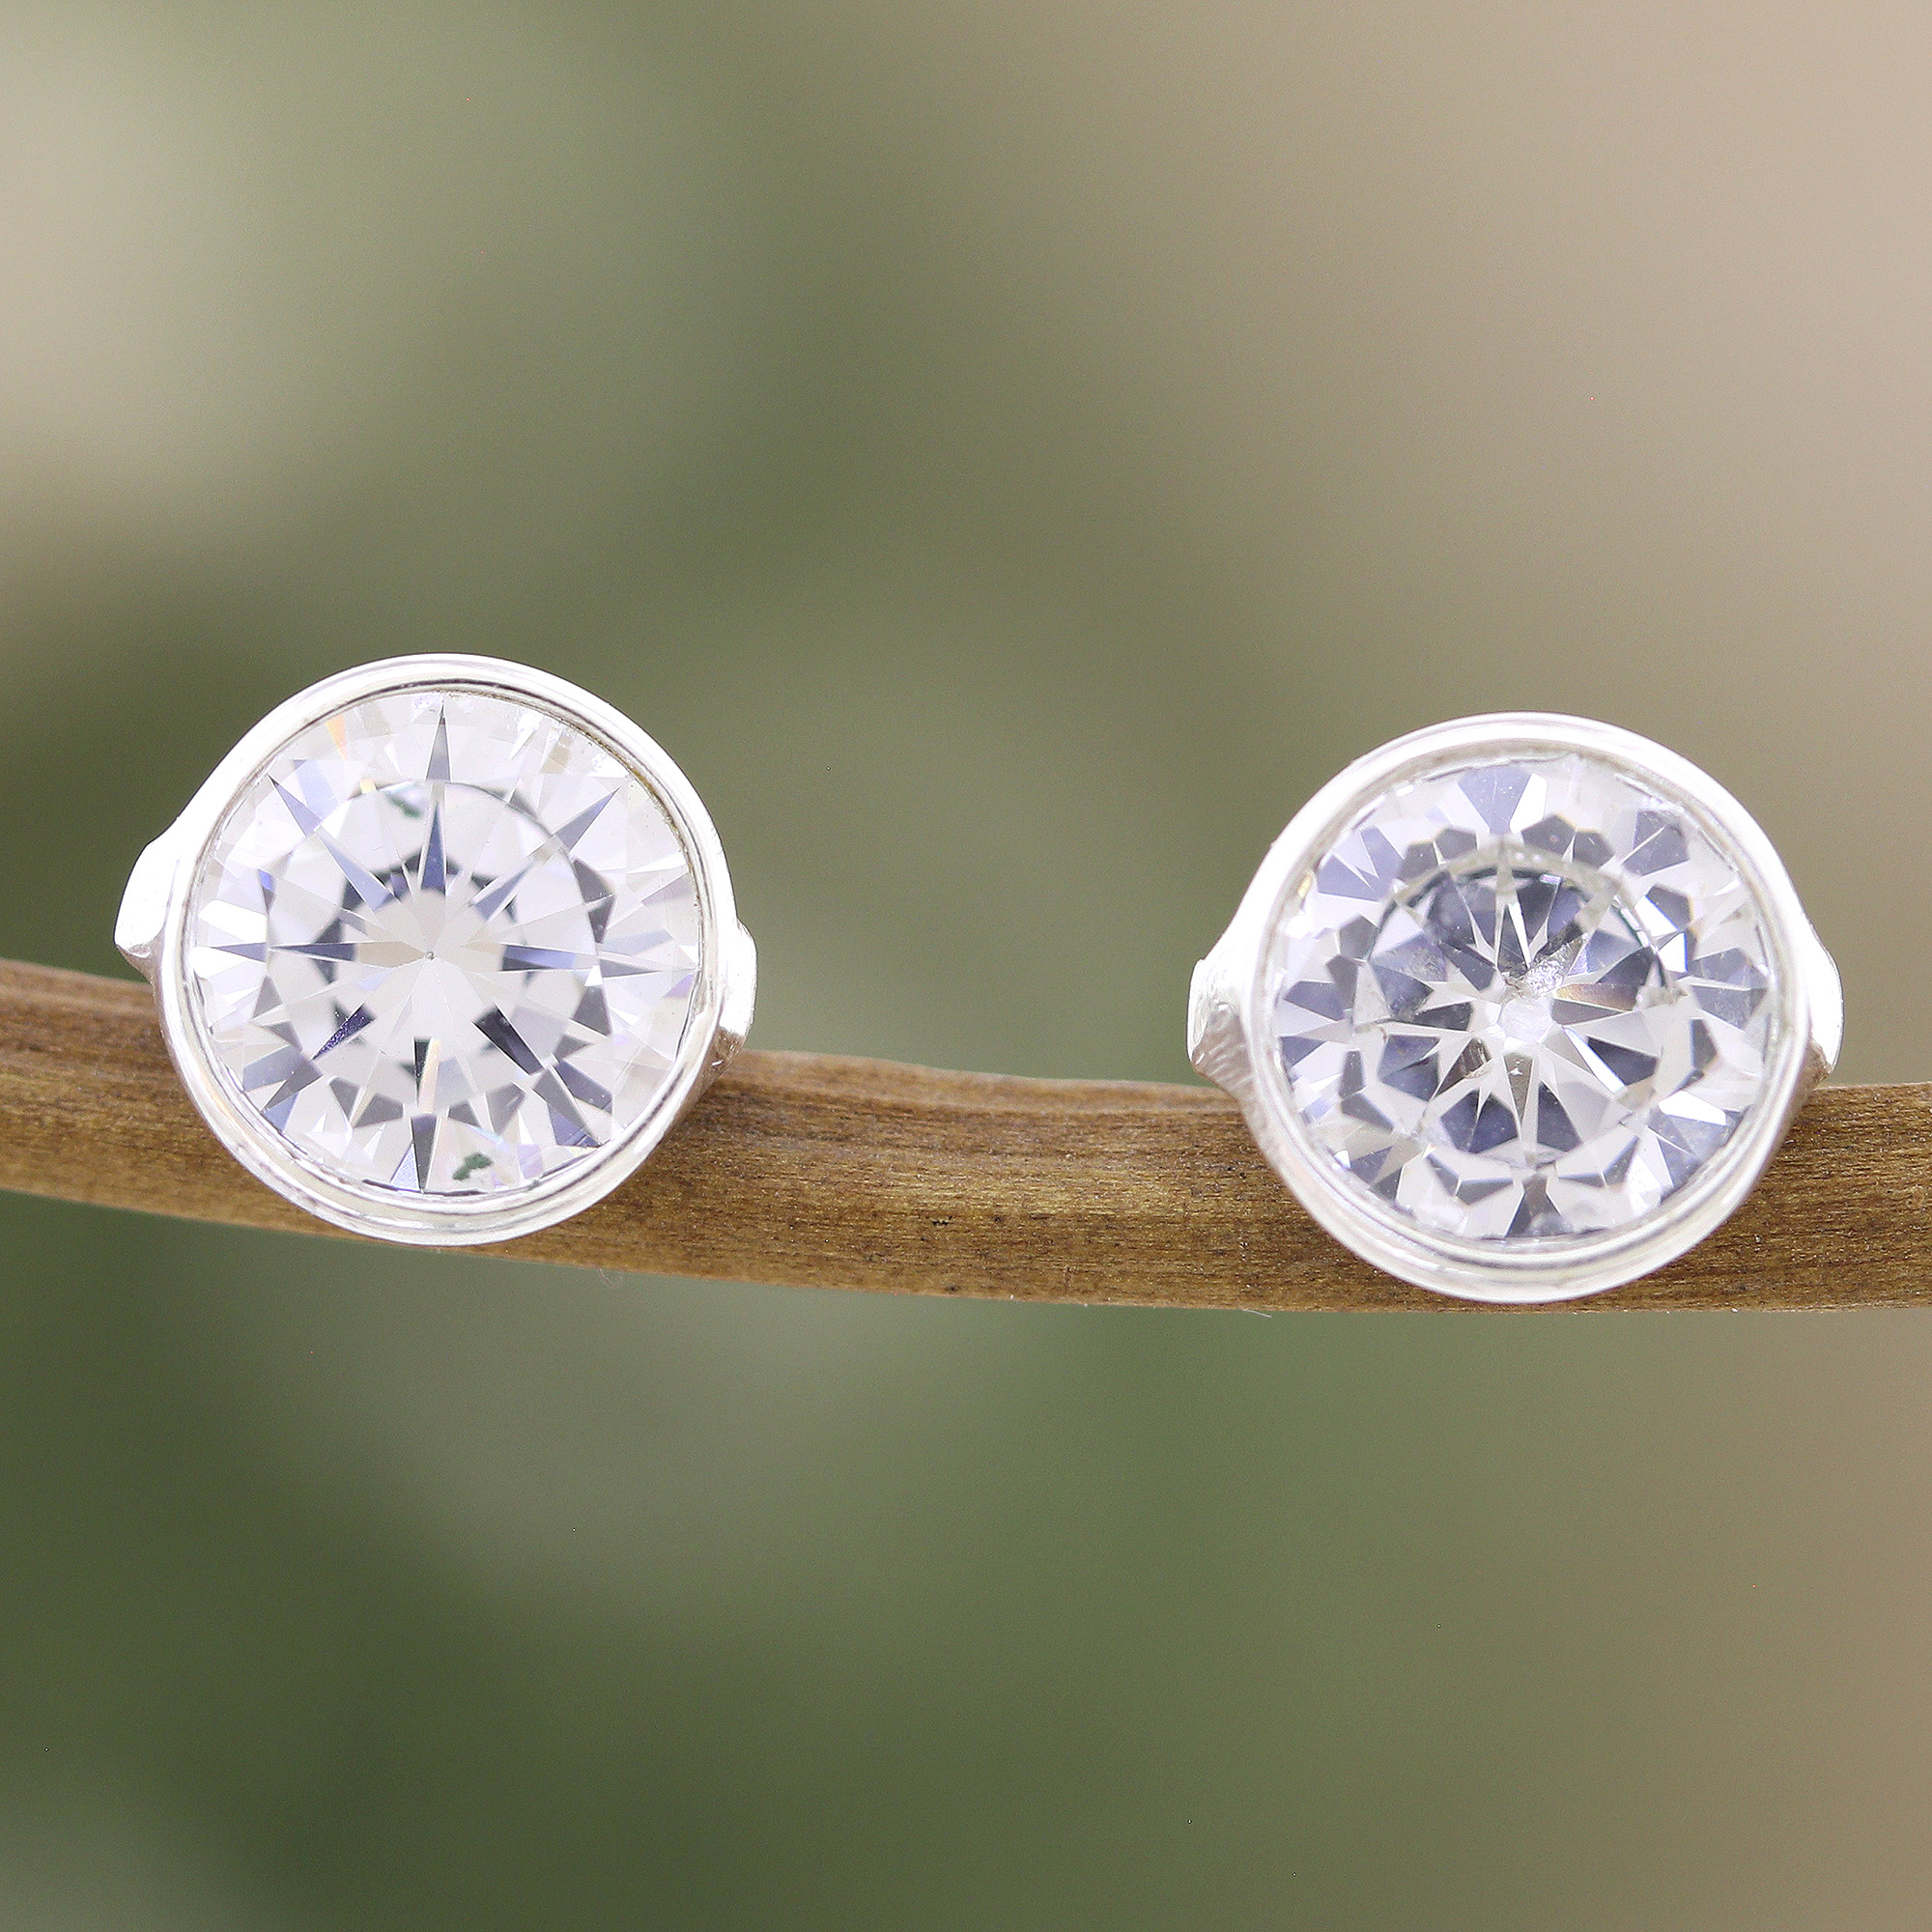 Polished Sterling Silver Cubic Zirconia Stud Earrings - White Night